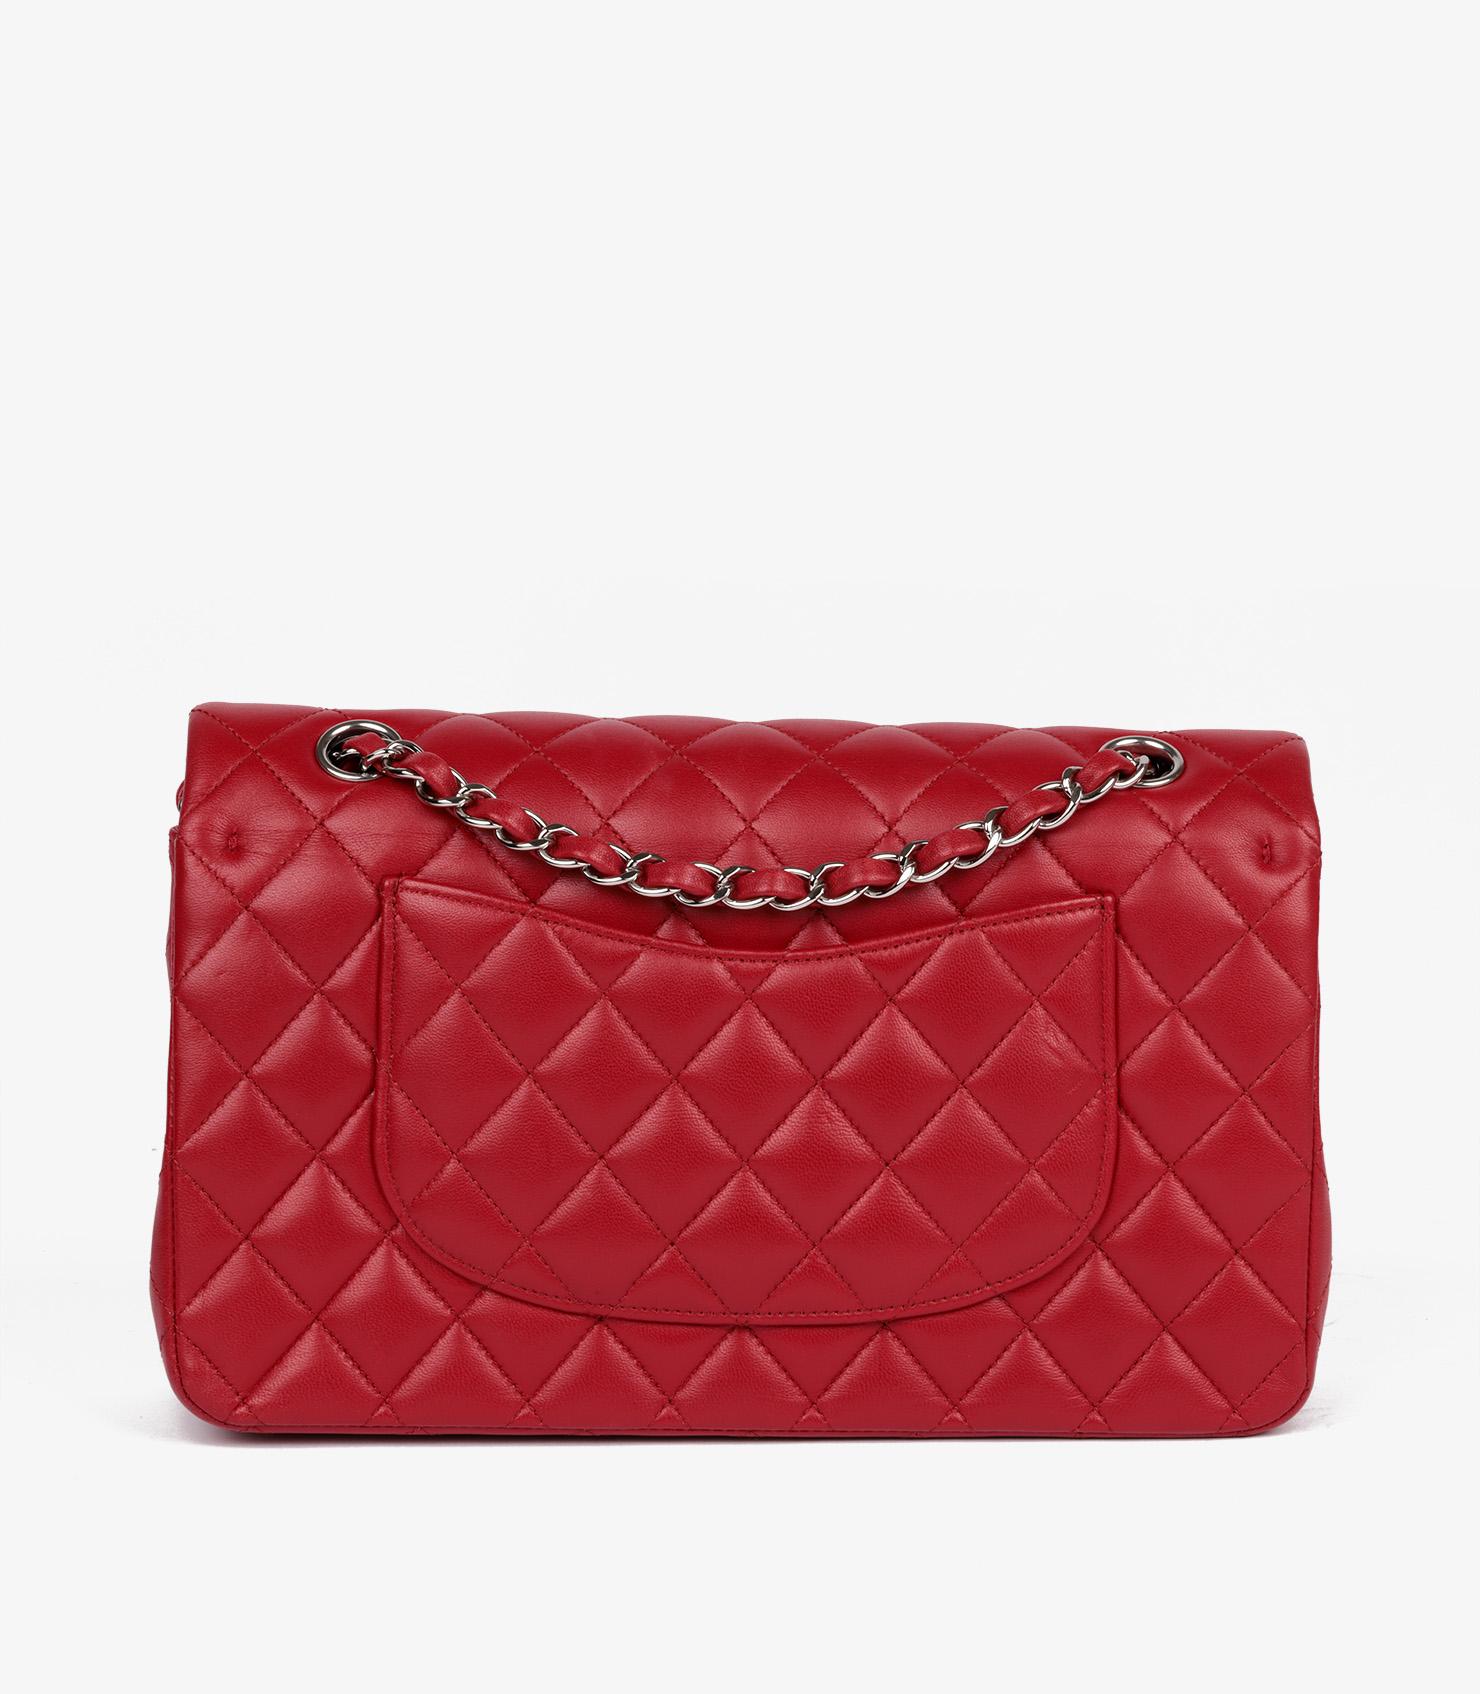 Chanel Red Quilted Lambskin Medium Classic Double Flap Bag For Sale 2